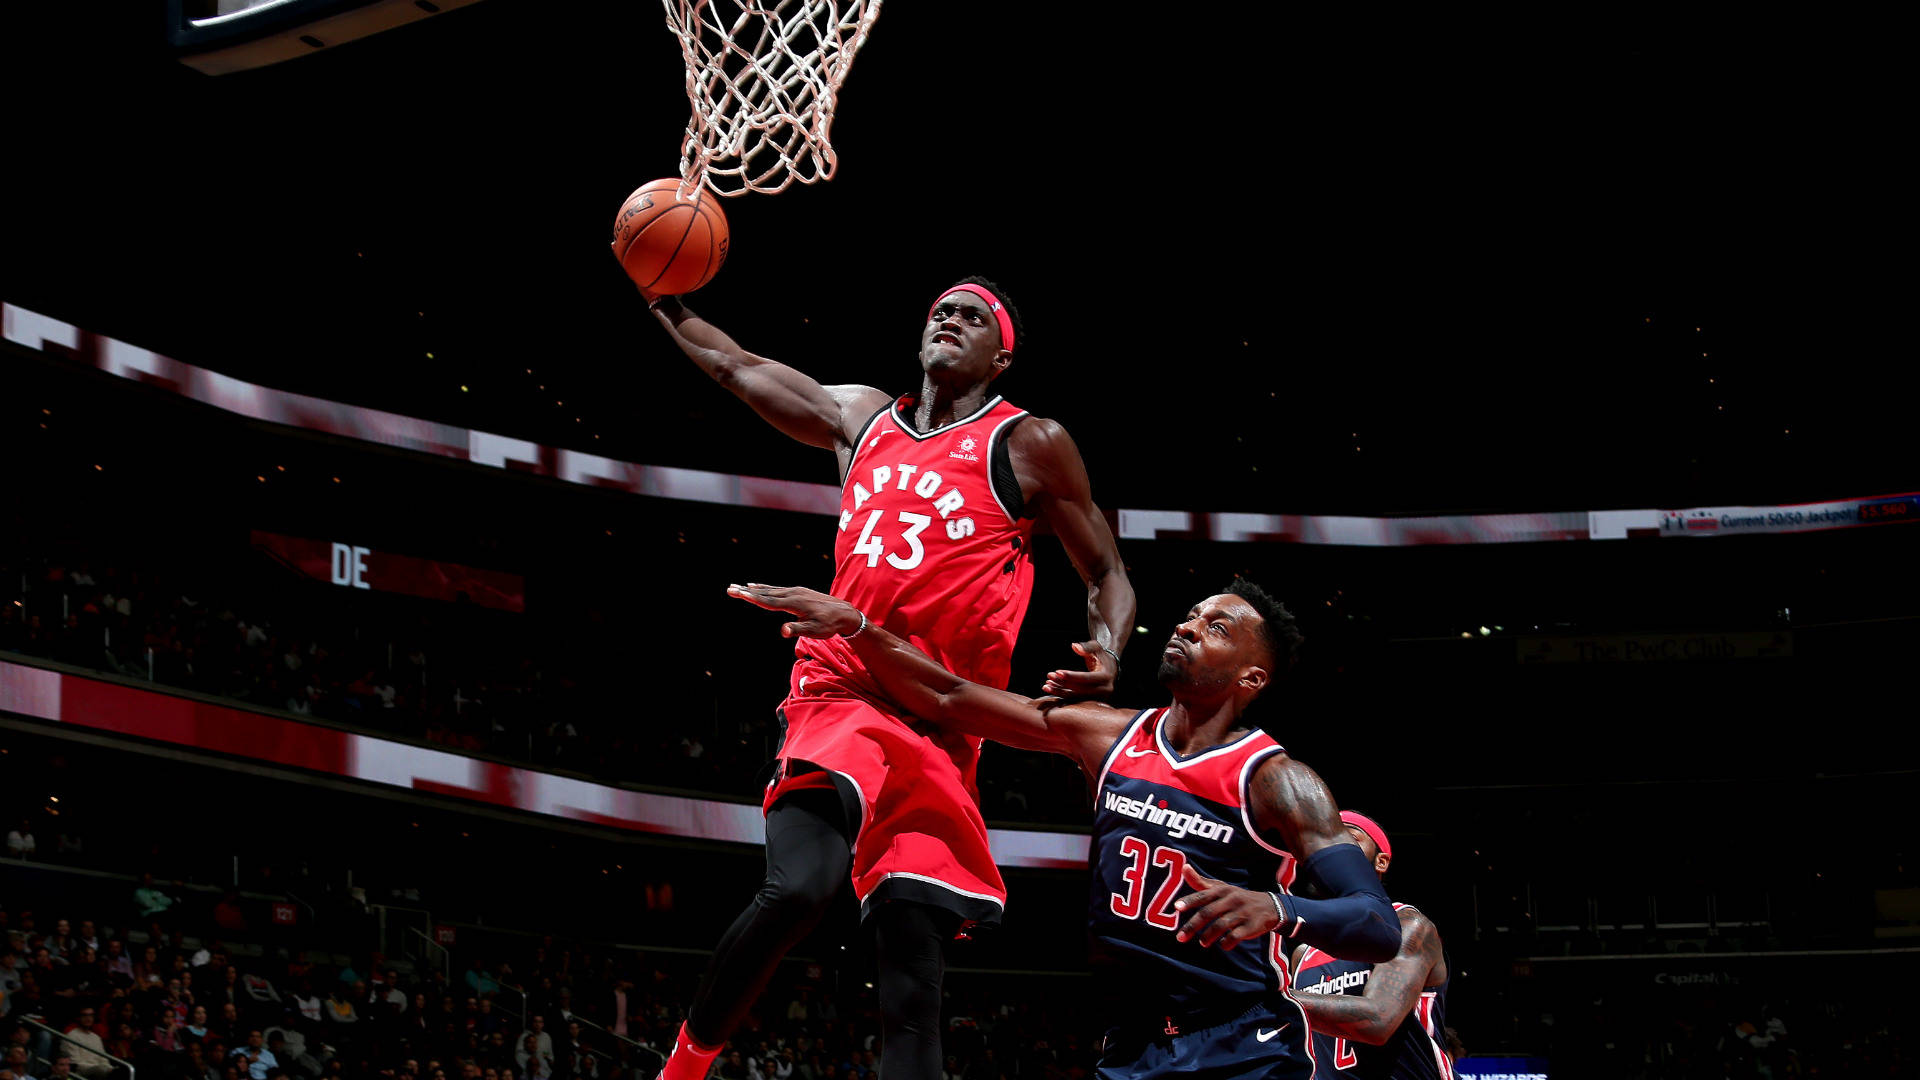 Pascal Siakam Dunking Vs Wizards Background